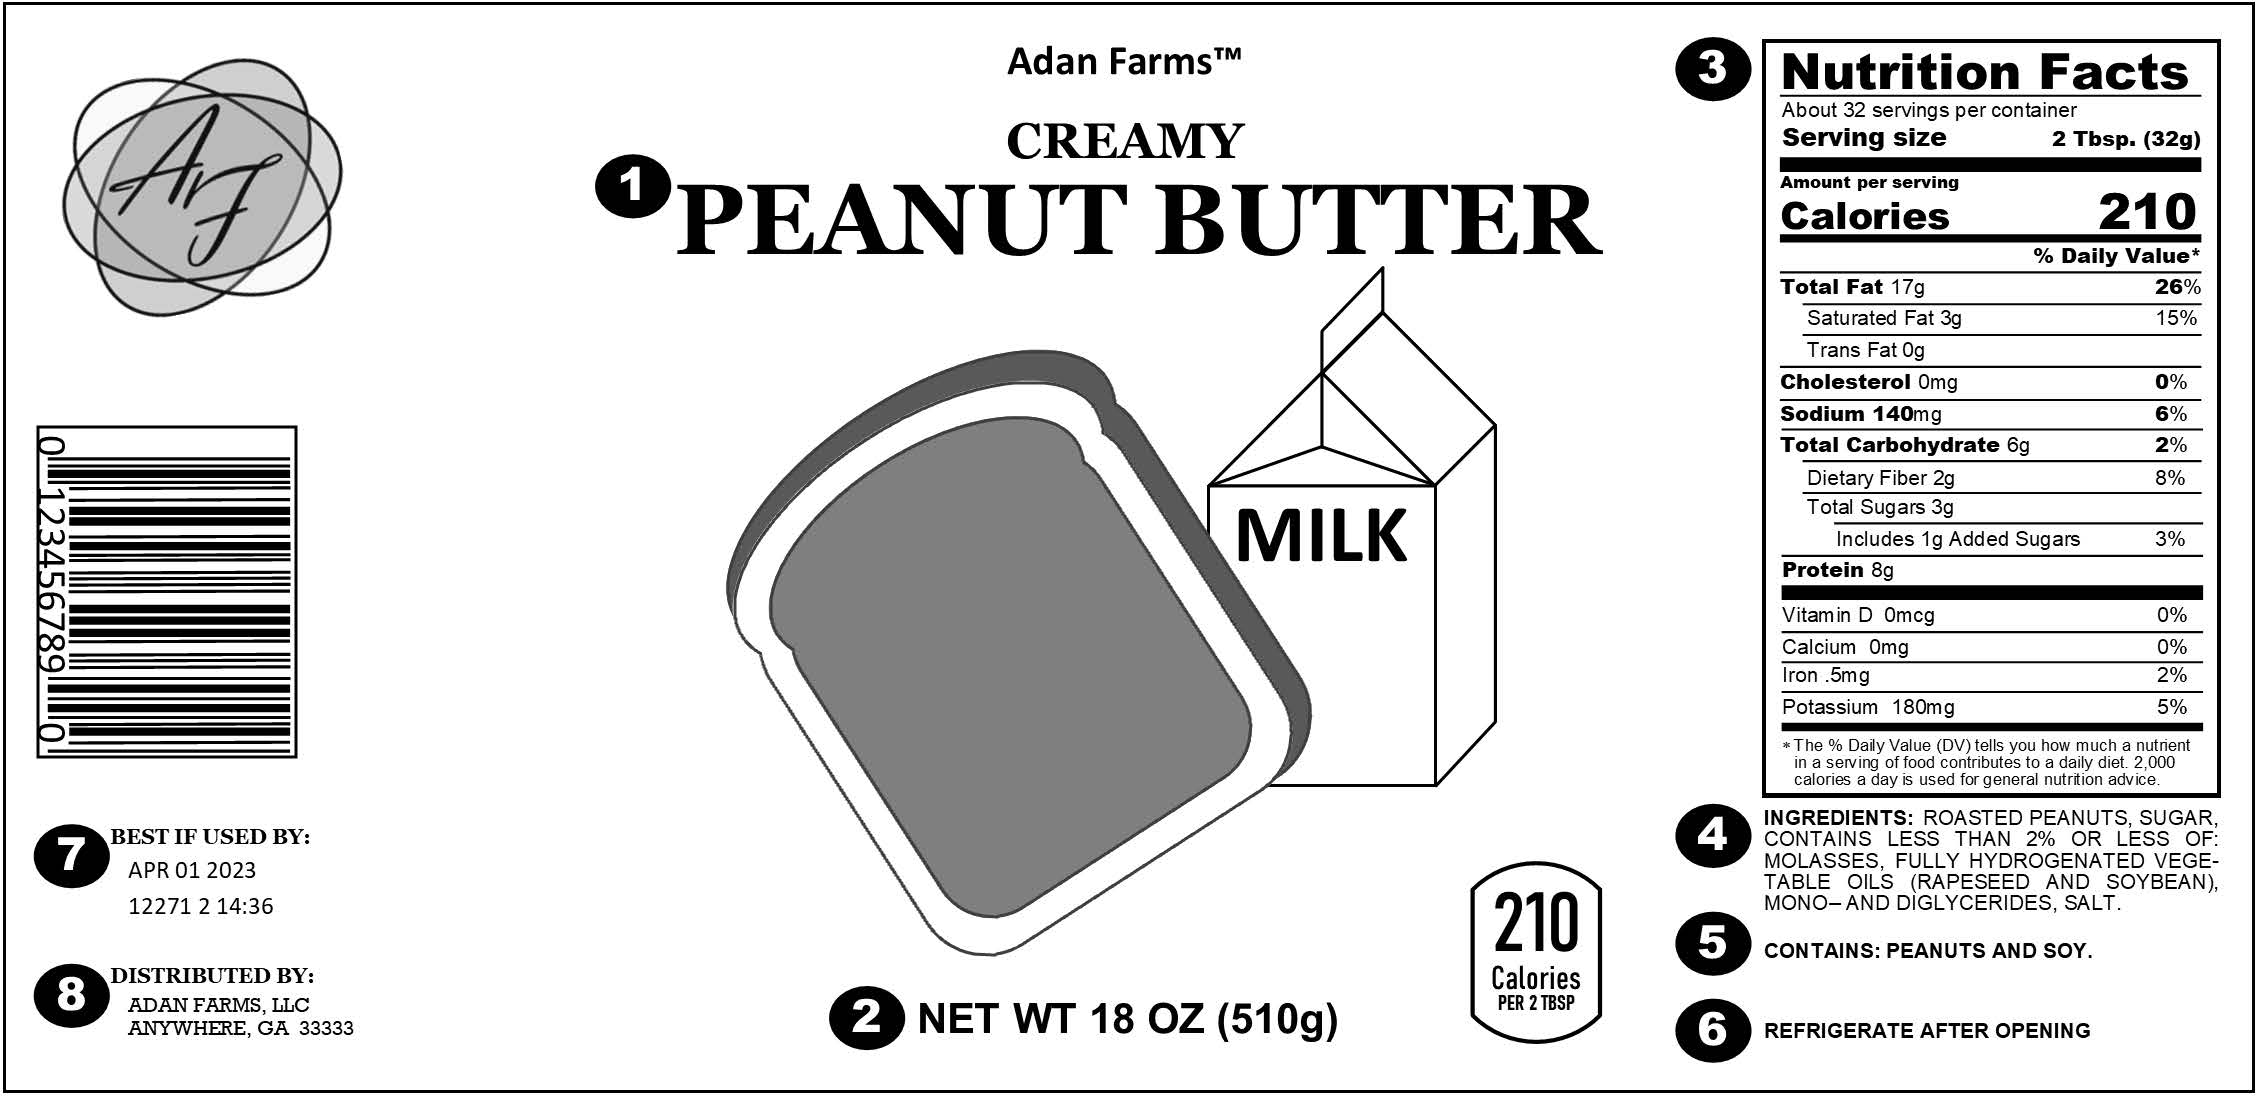 Sample Label with required elements